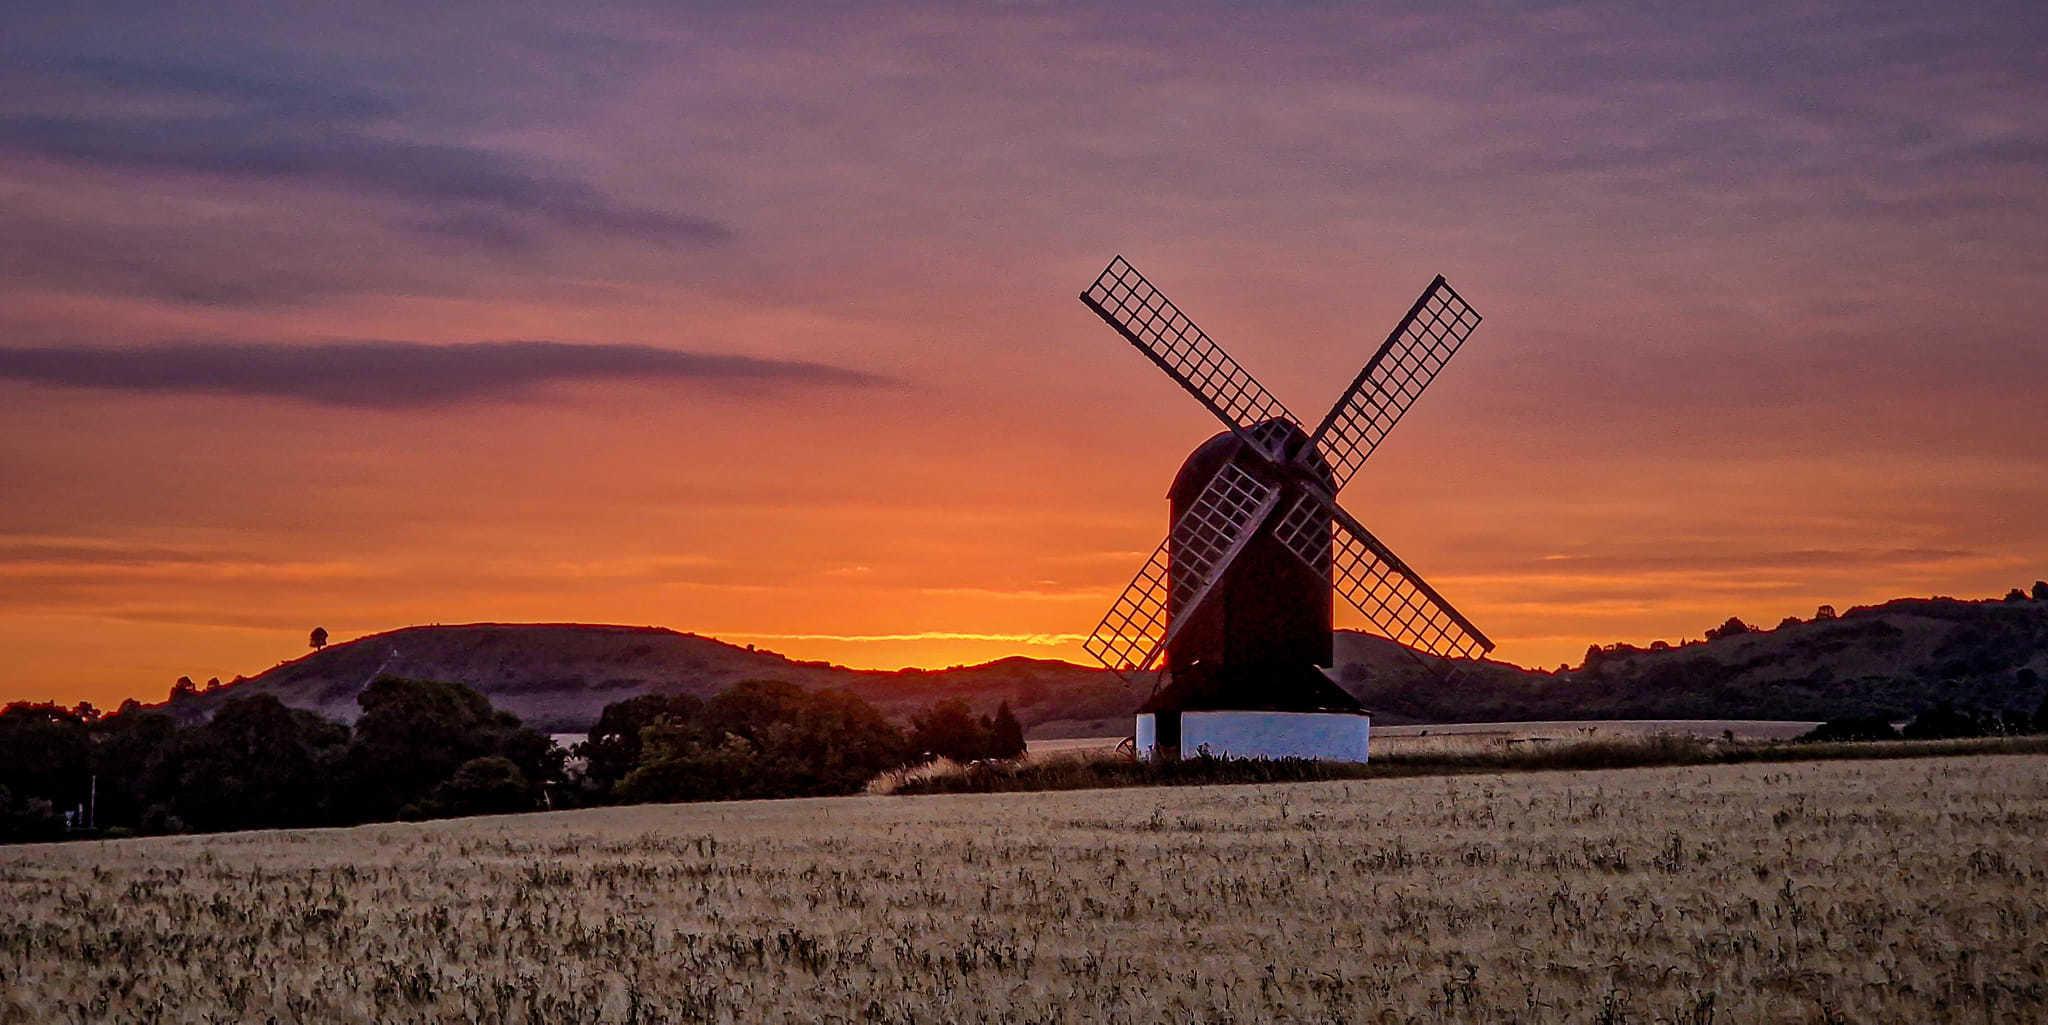 Neil James Green: Had a drive out to Pitstone a few days ago for sunrise. Didnt disappoint.